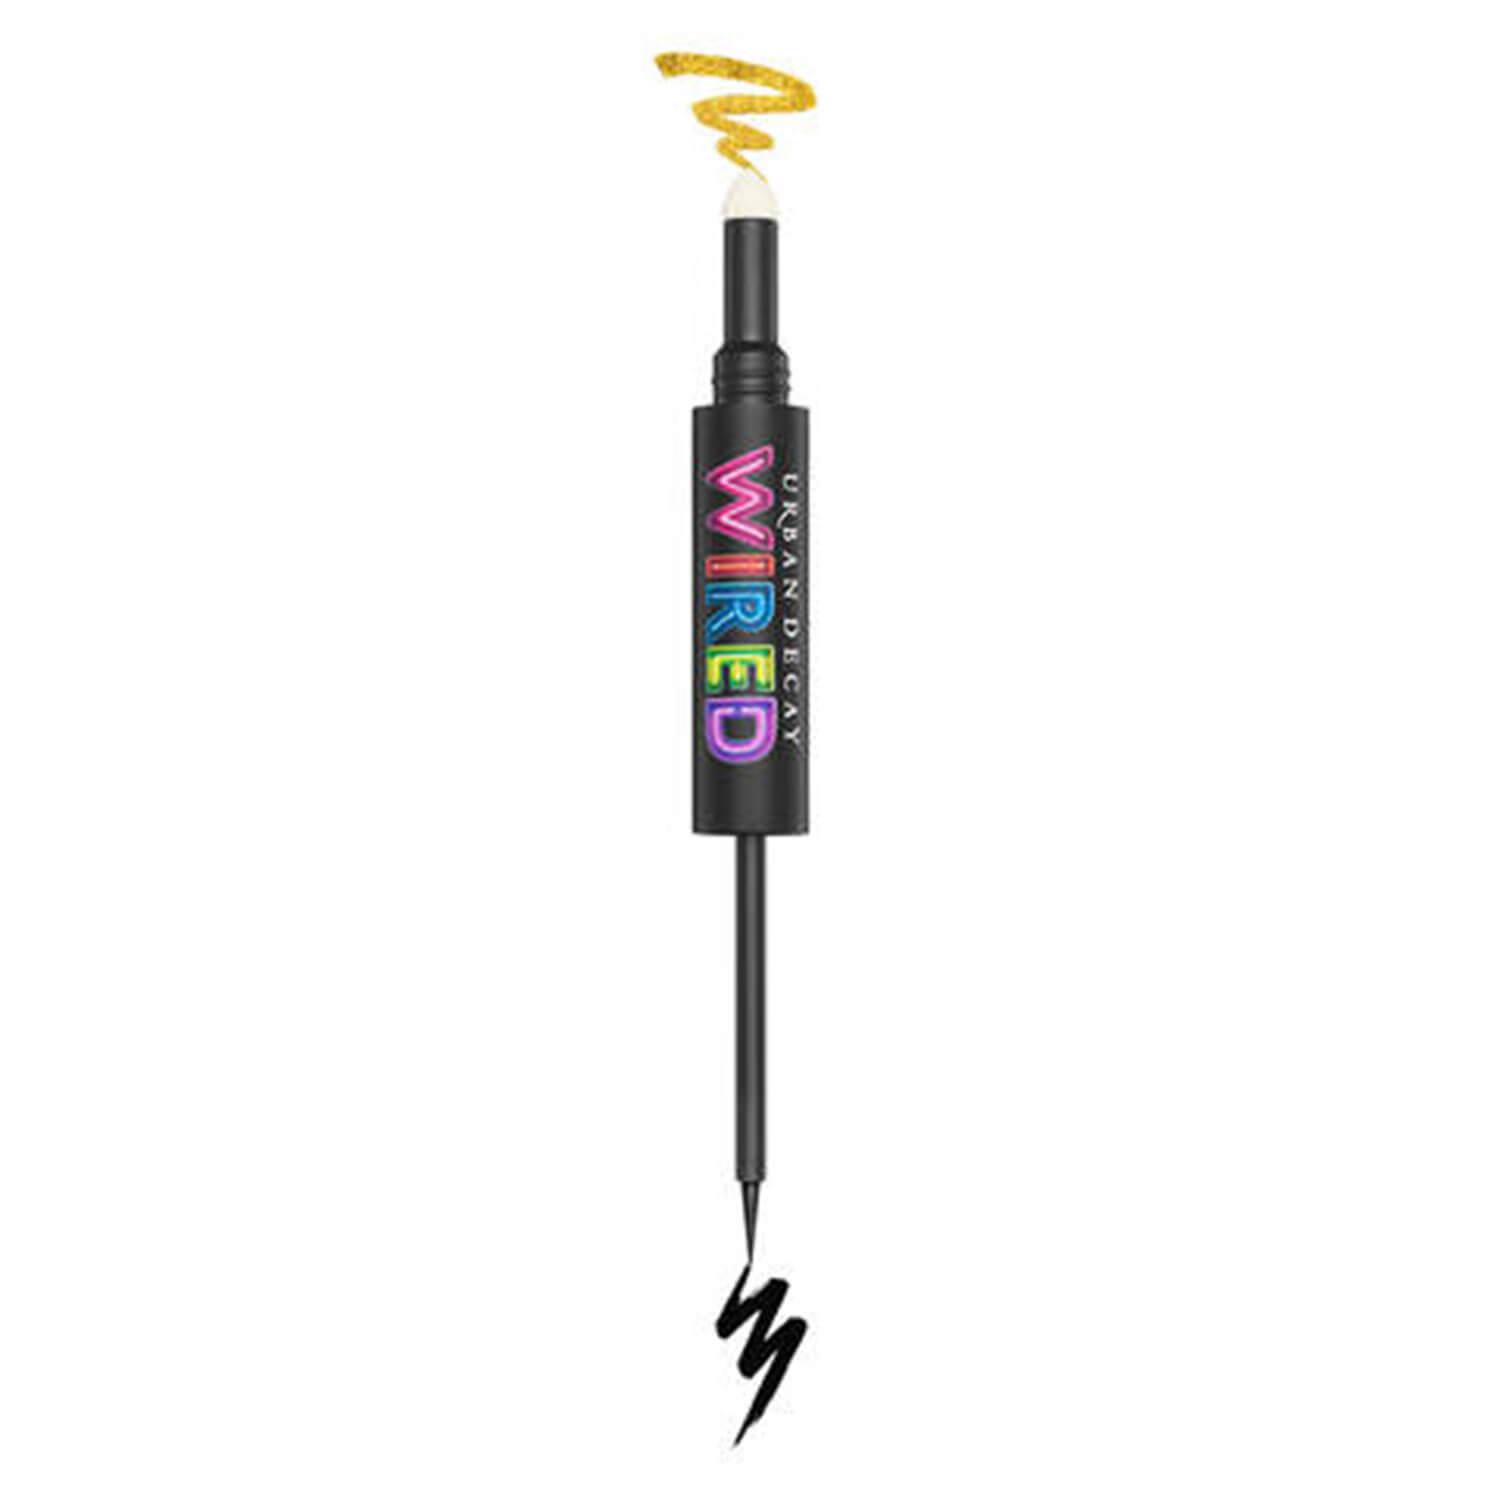 Wired - Double-Ended Eyeliner & Top Coat Circuit